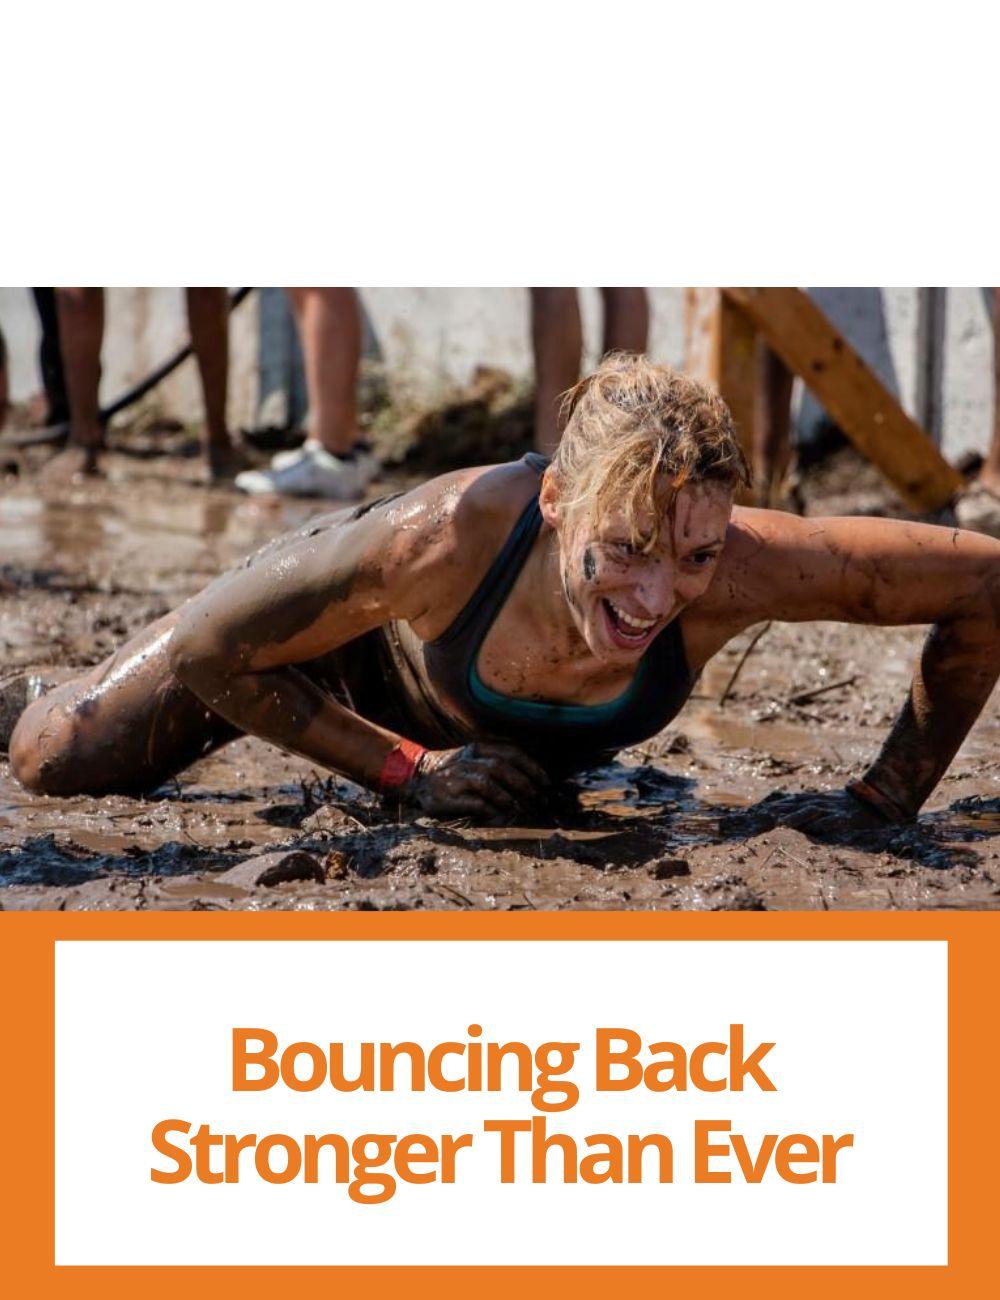  Link to related stories. Image: a woman who is getting up from the mud. Story headline: Bouncing Back Stronger Than Ever